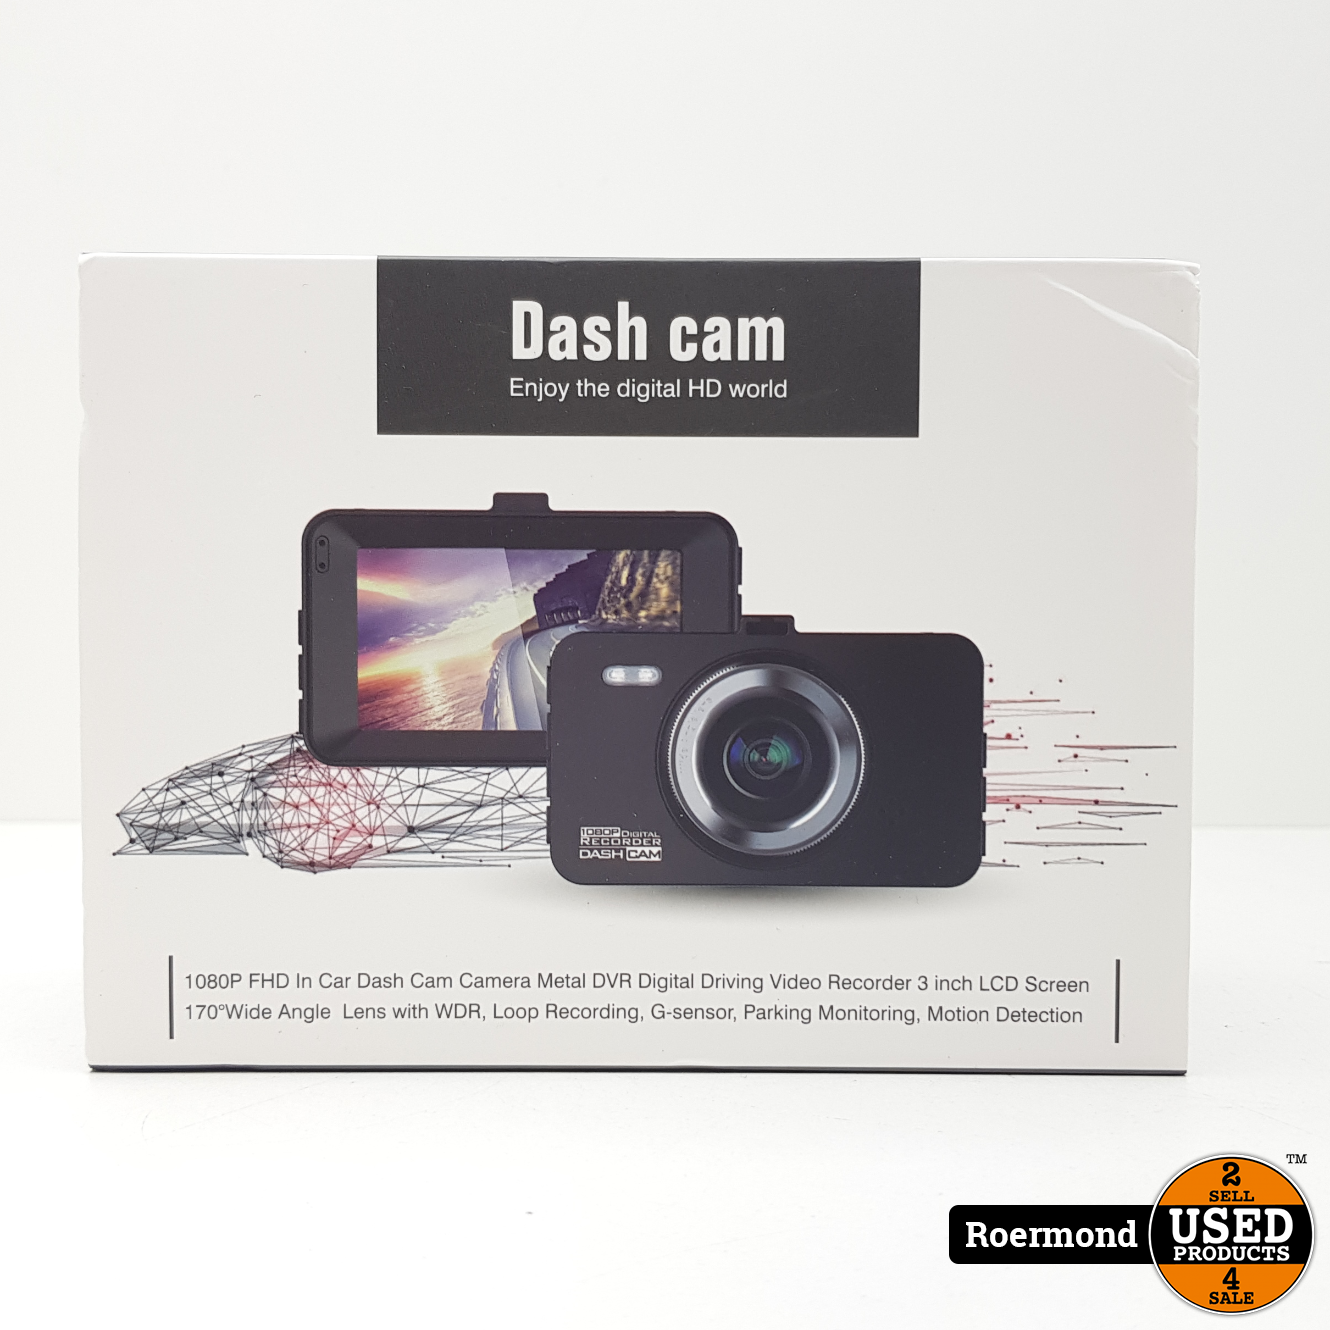 gids Kanon donor Dash Cam Camera I Nieuw - Used Products Roermond